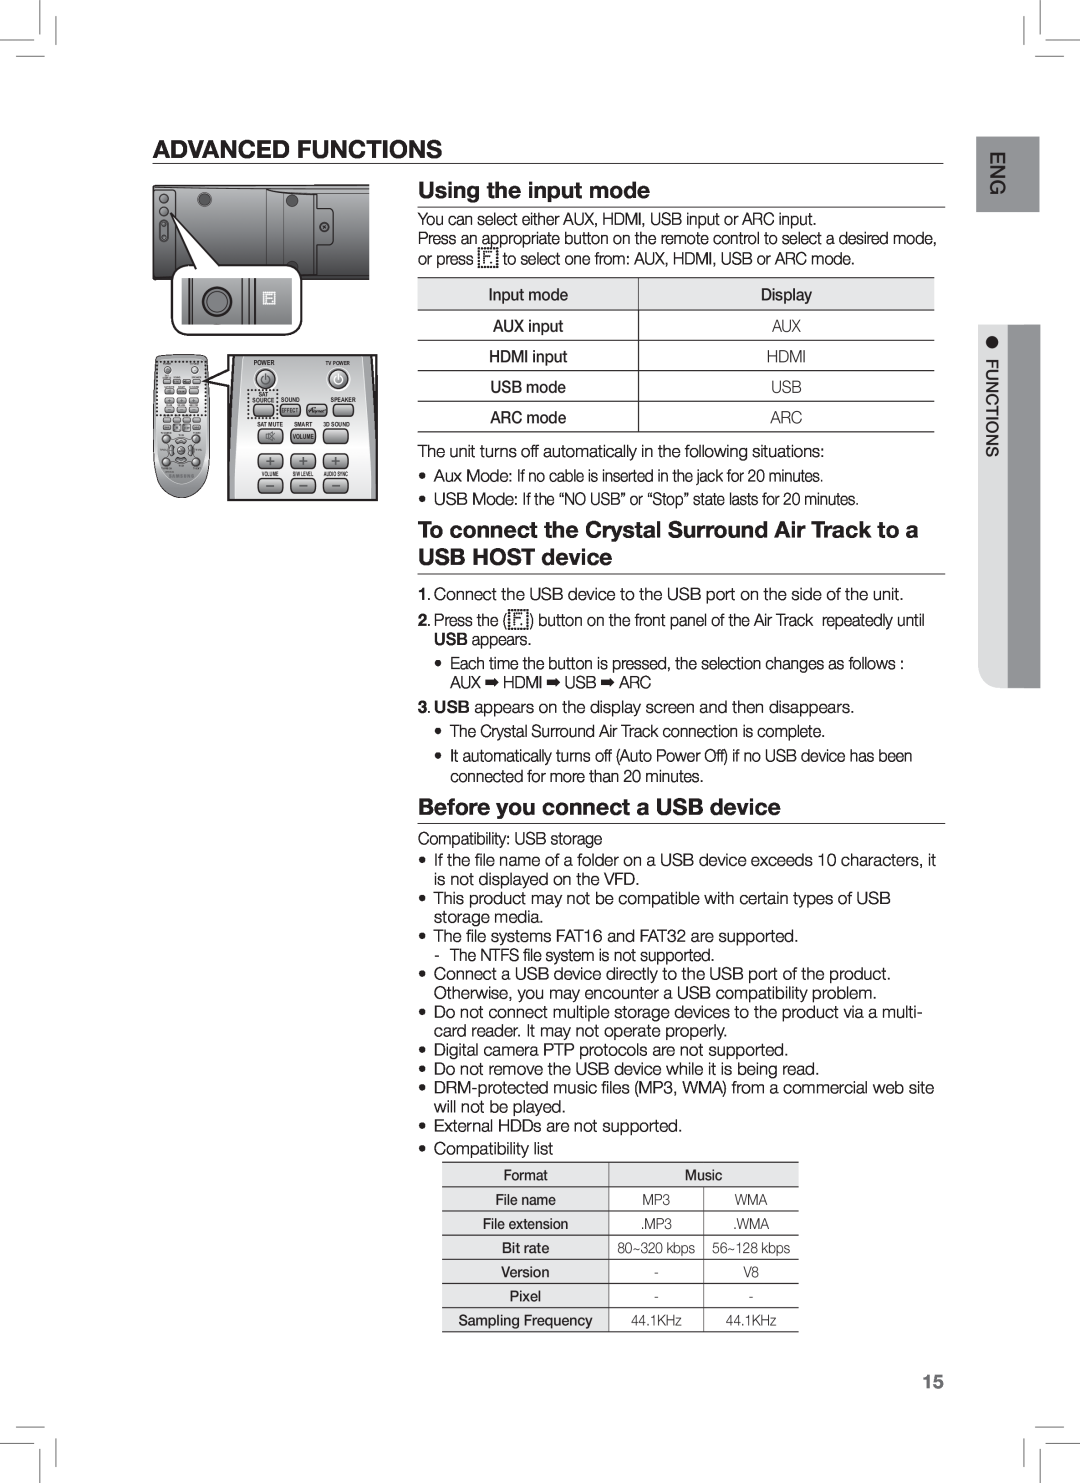 Samsung HW-E350 user manual Advanced Functions, Using the input mode, Before you connect a USB device 